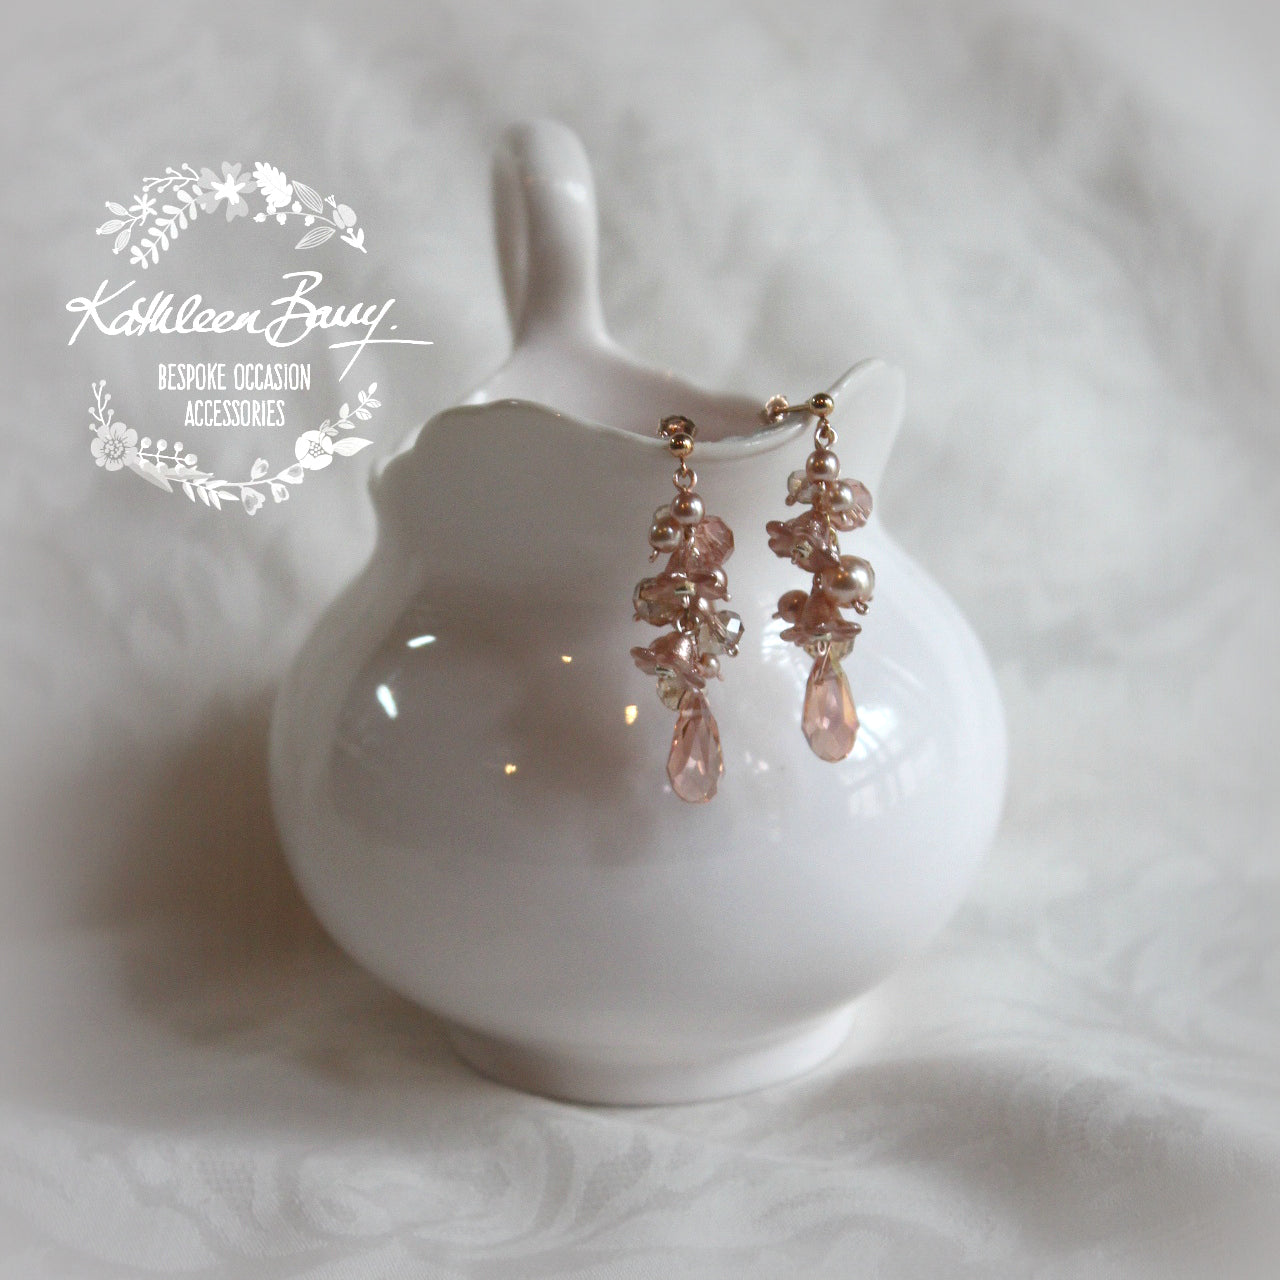 Christine earrings - Sage green or Off-white or Blush Pink - Rose gold, pale gold or silver